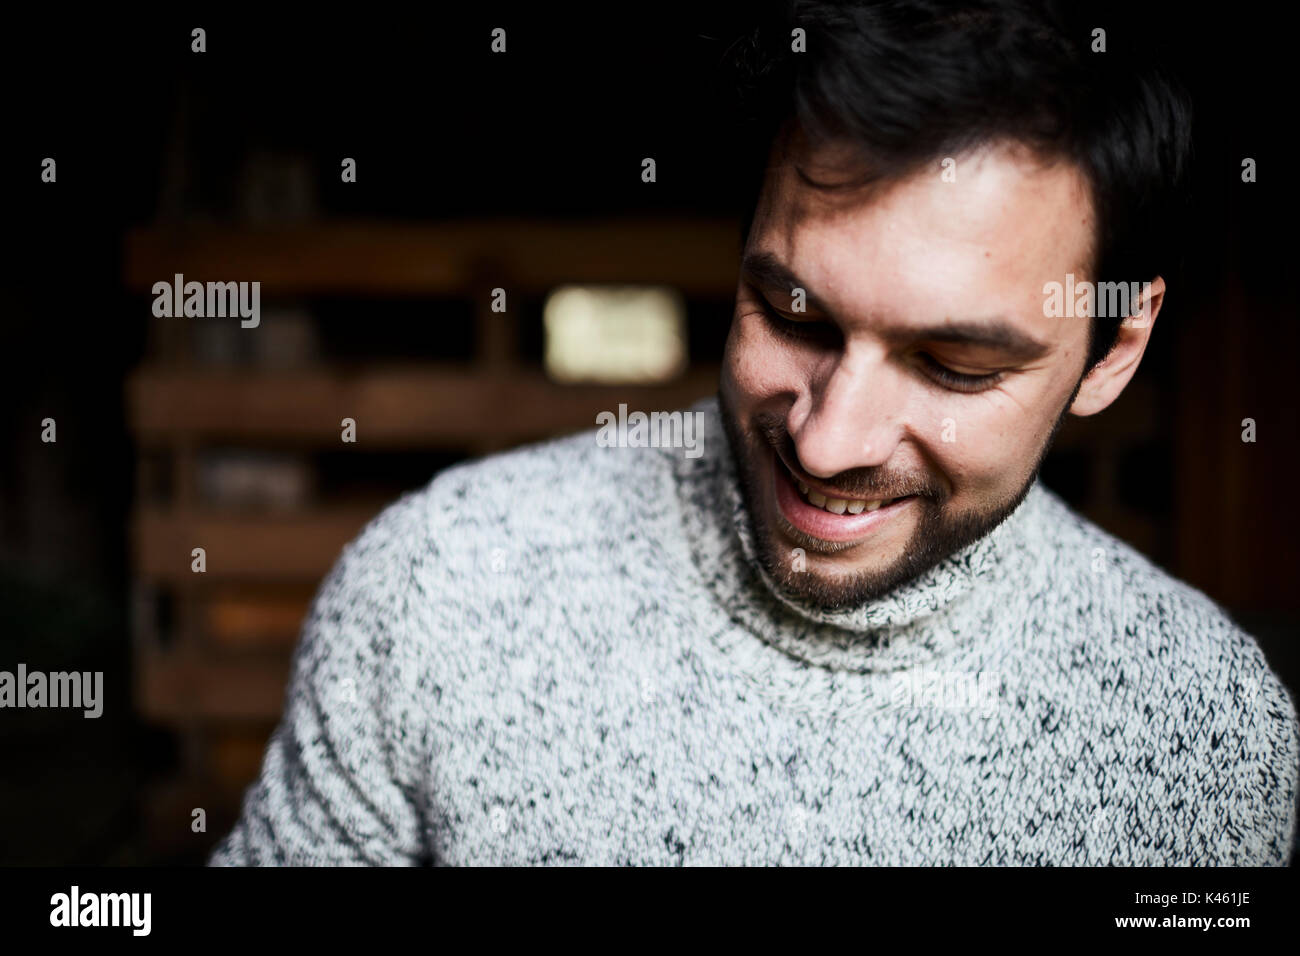 Barn, man with knitted pullover, cheerful, portrait, Stock Photo